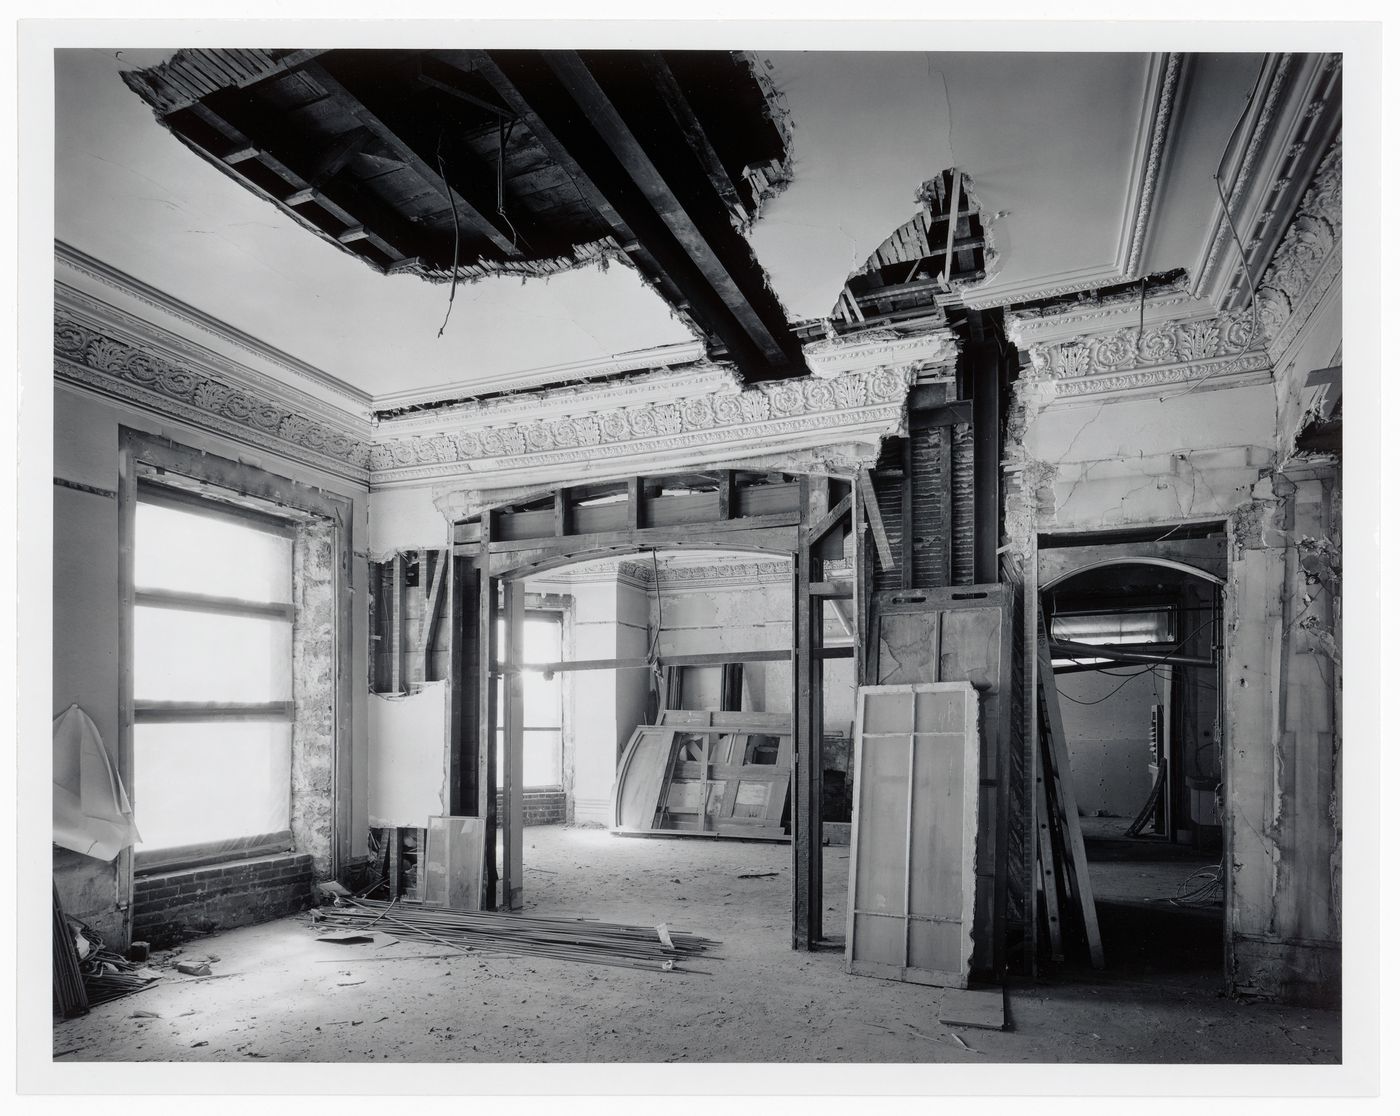 Interior view of reception rooms showing door frames and windows, Shaughnessy House under renovation, Montréal, Québec